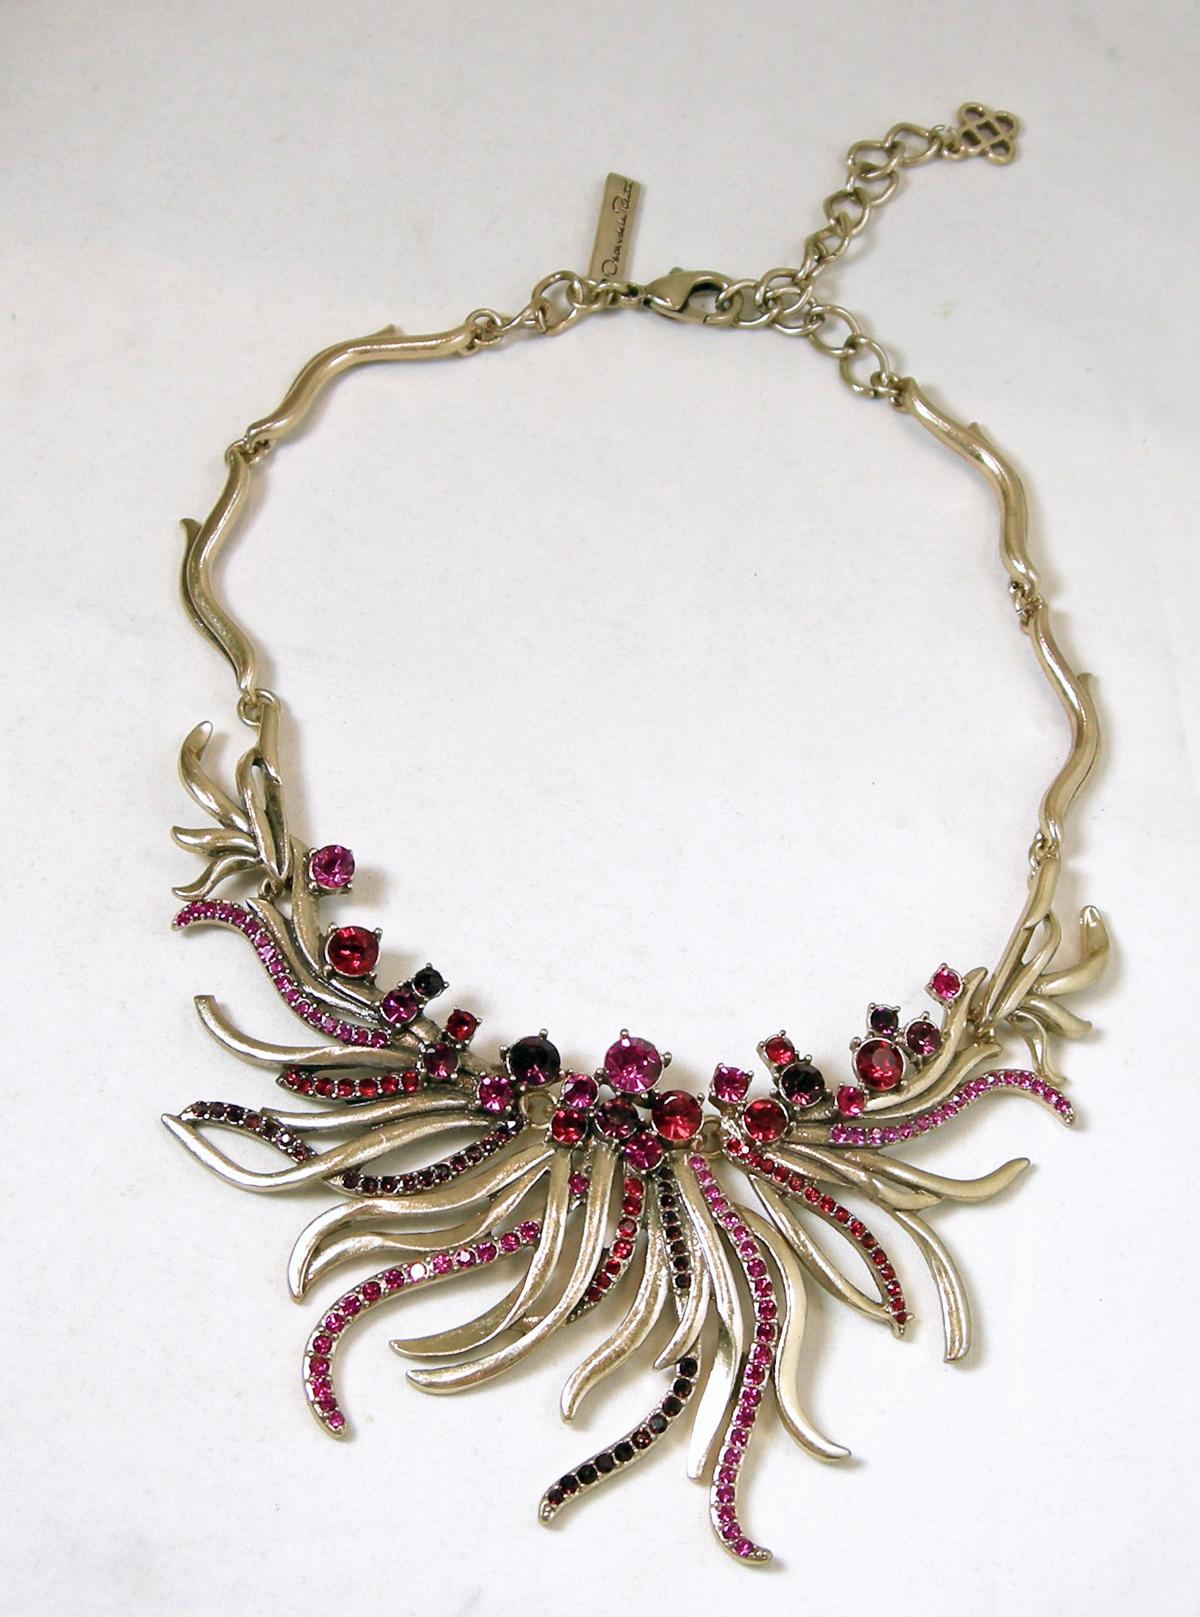 This signed Oscar de la Renta necklace has a mixture of  red, pink & amethyst crystals in a gold tone setting.  This necklace measures 17-1/2” long with a spring clasp.  The front centerpiece is 2-1/2” top to bottom.  This necklace is signed “Oscar